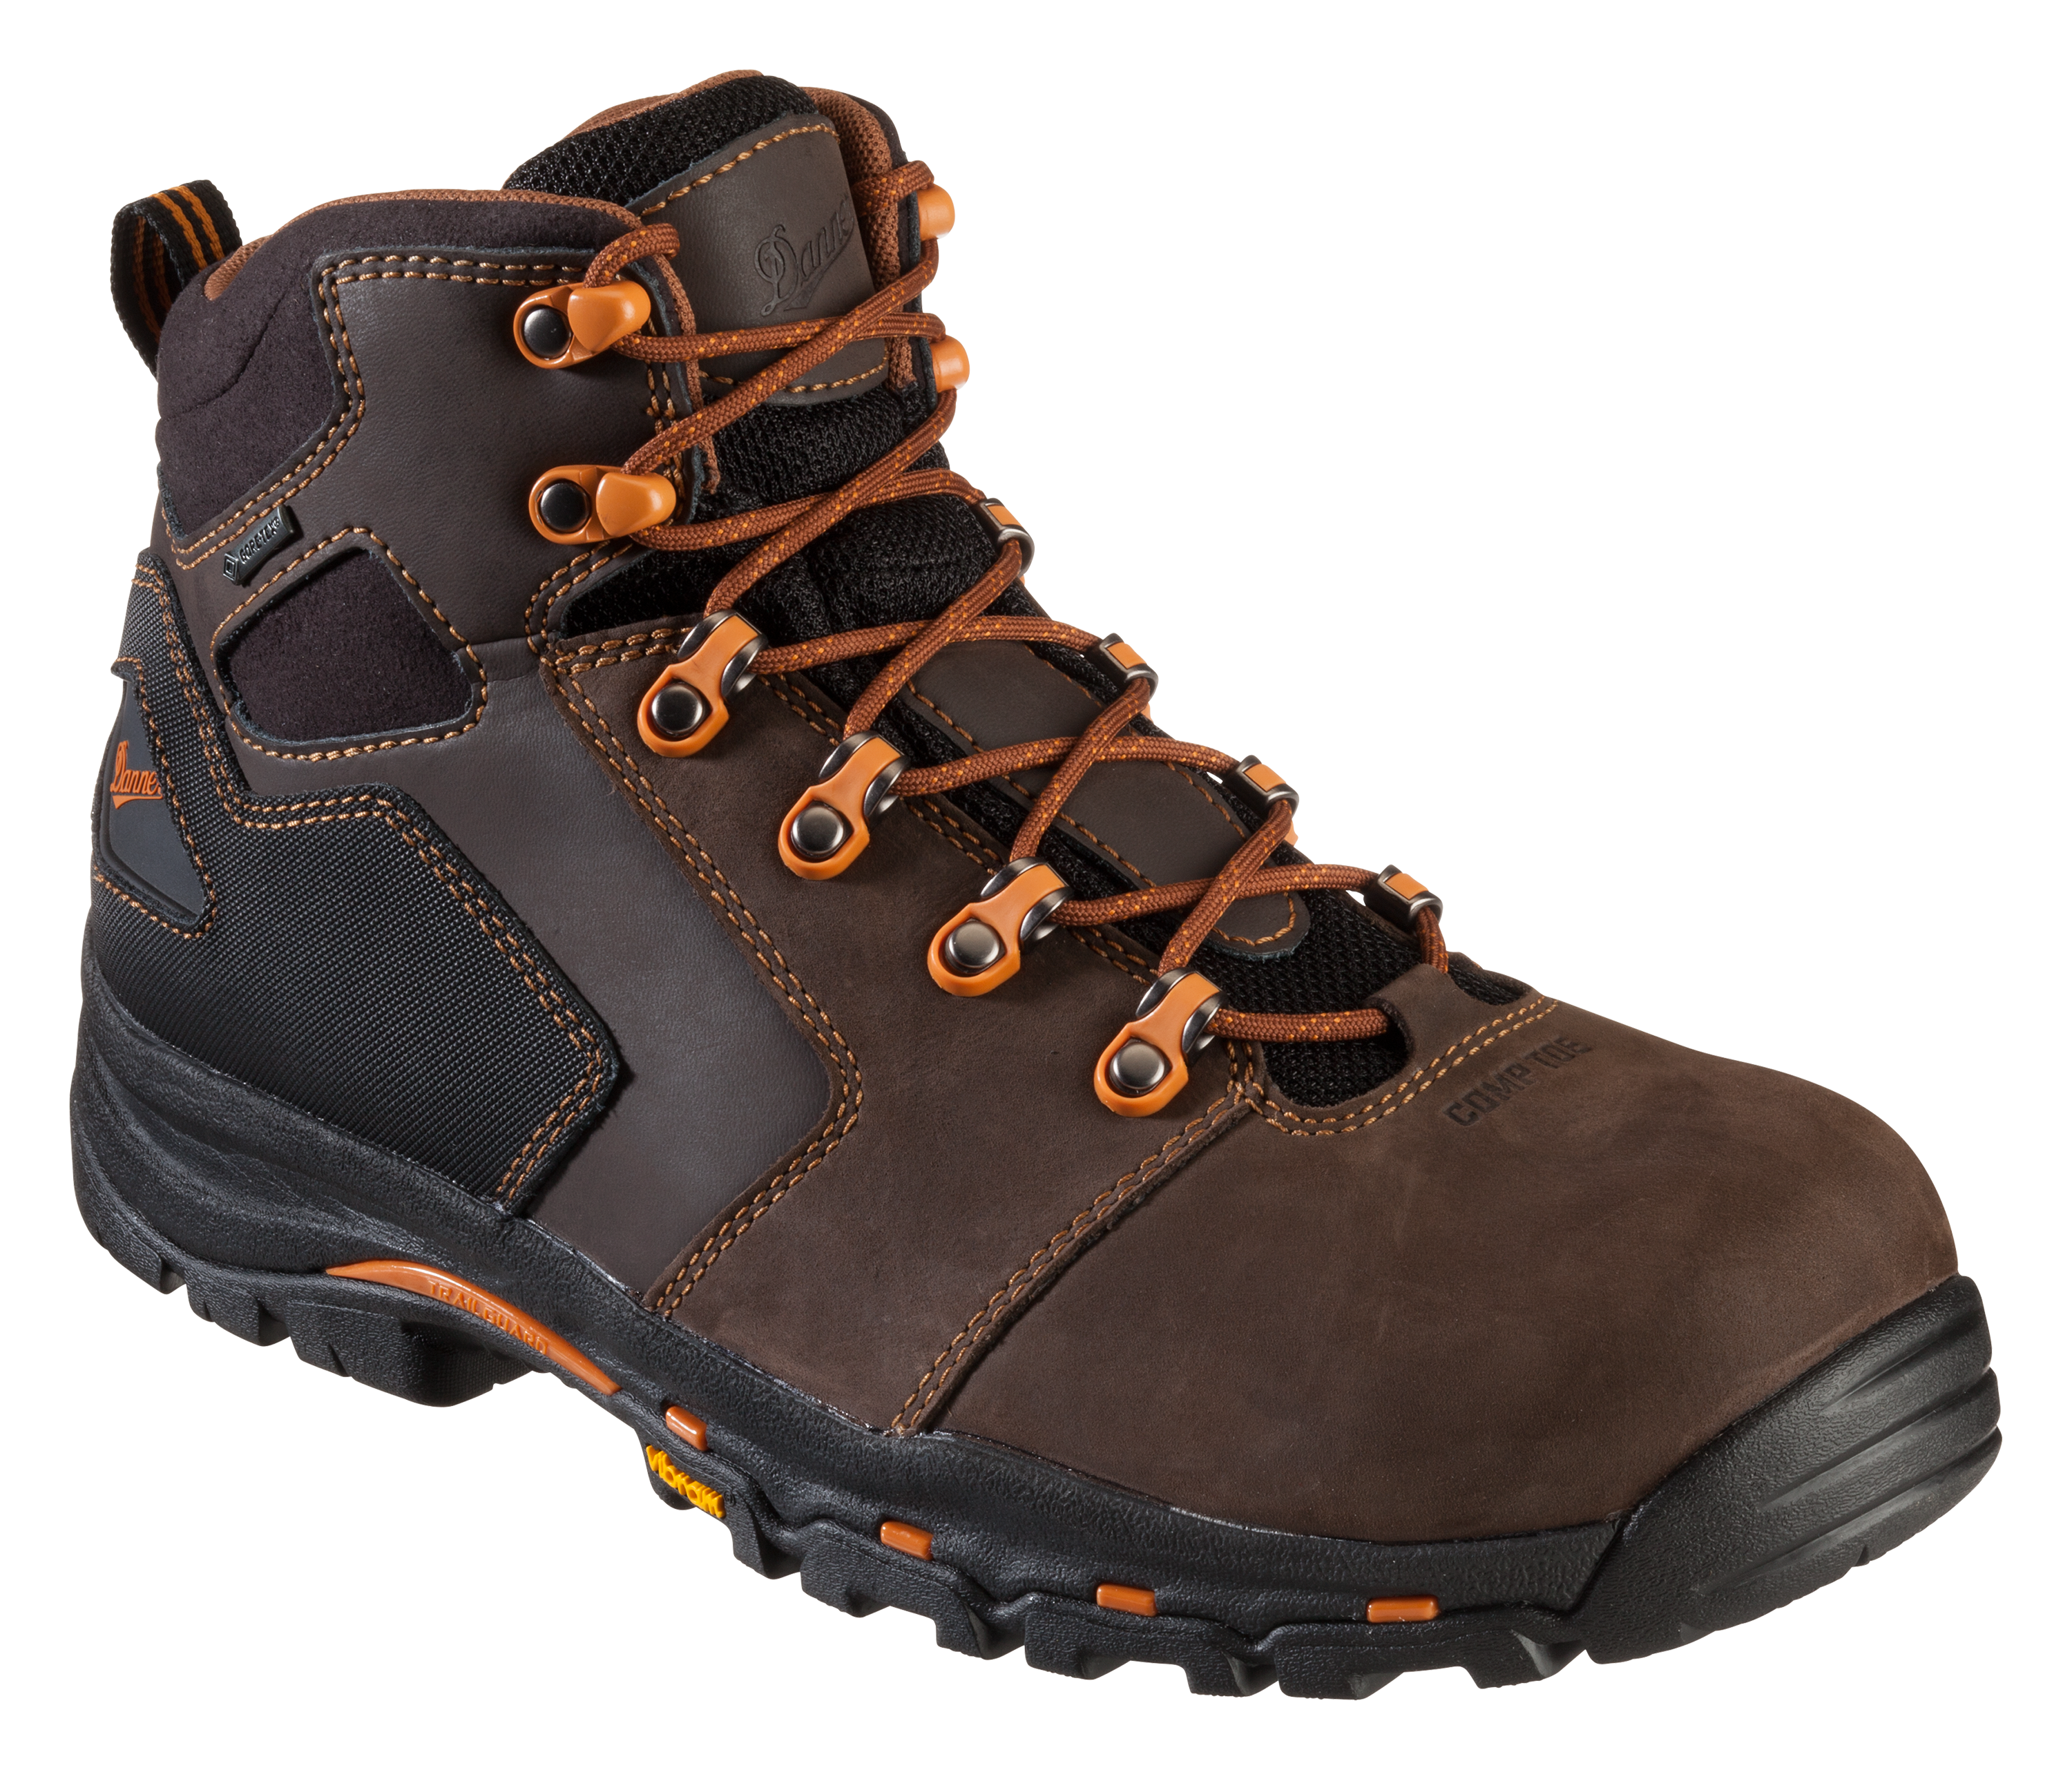 Danner Vicious GORE-TEX Non-Metallic Safety Toe Work Boots for Men - Brown - 7.5M